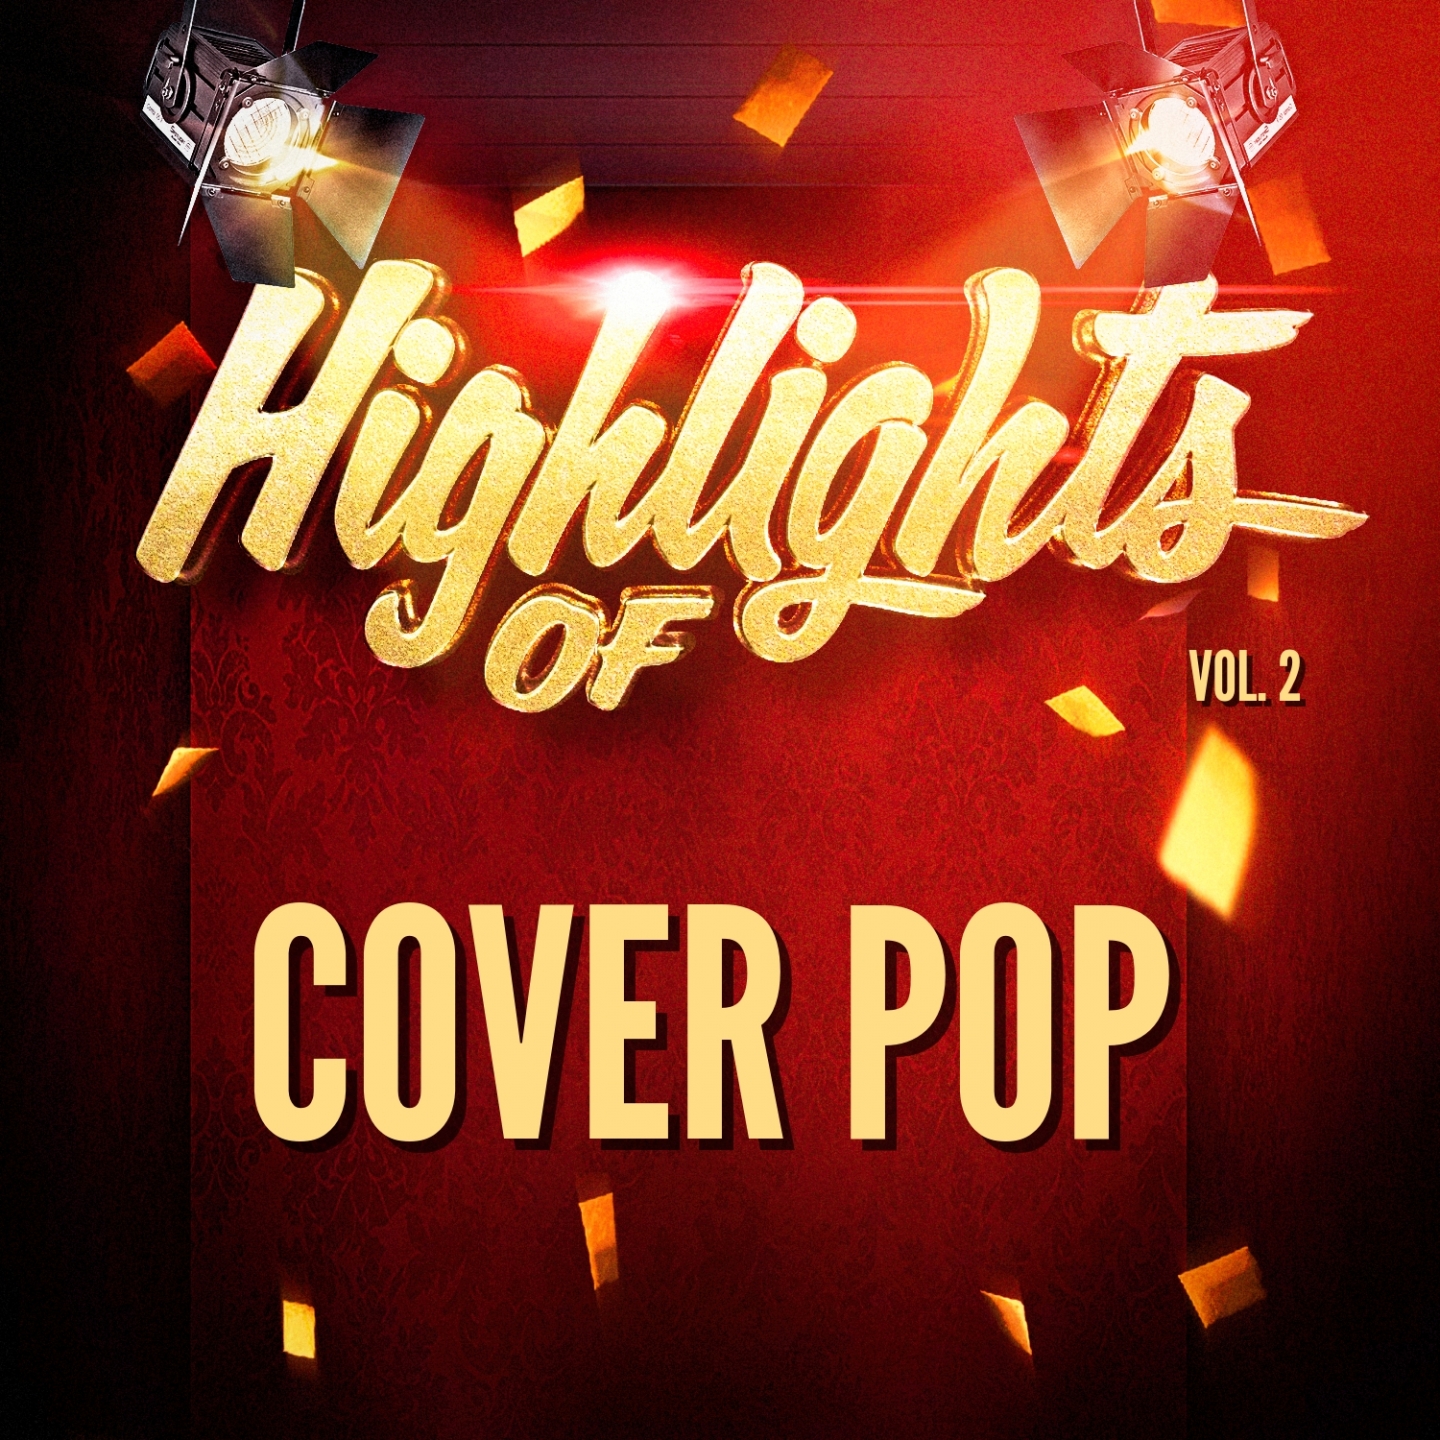 Highlights of Cover Pop, Vol. 2